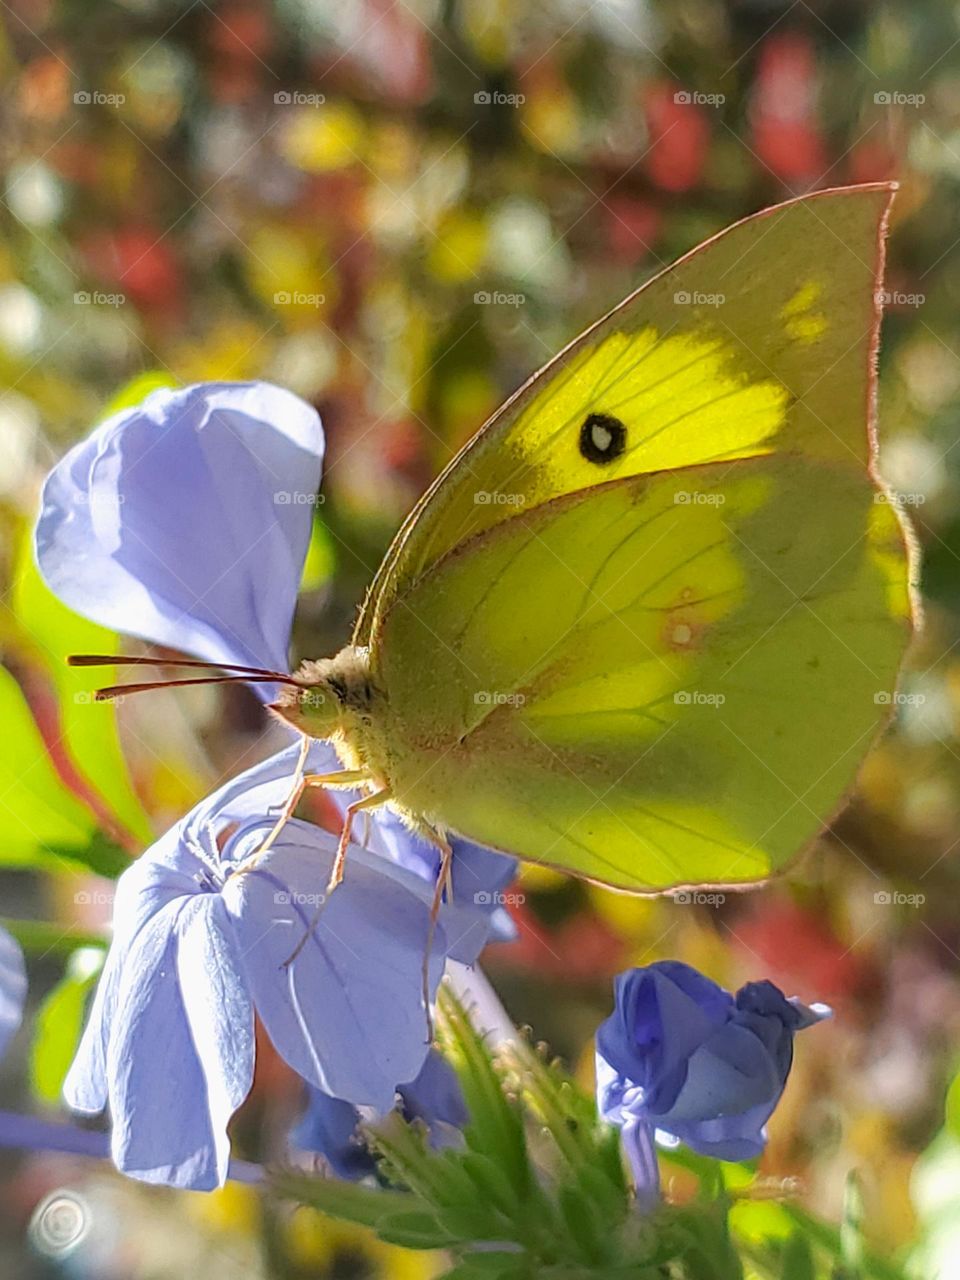 Closeup of the beautiful pale blue plumbago flower accented by a beautiful yellow butterfly illuminated by the sun with a colorful loropetalum shrub in the background.